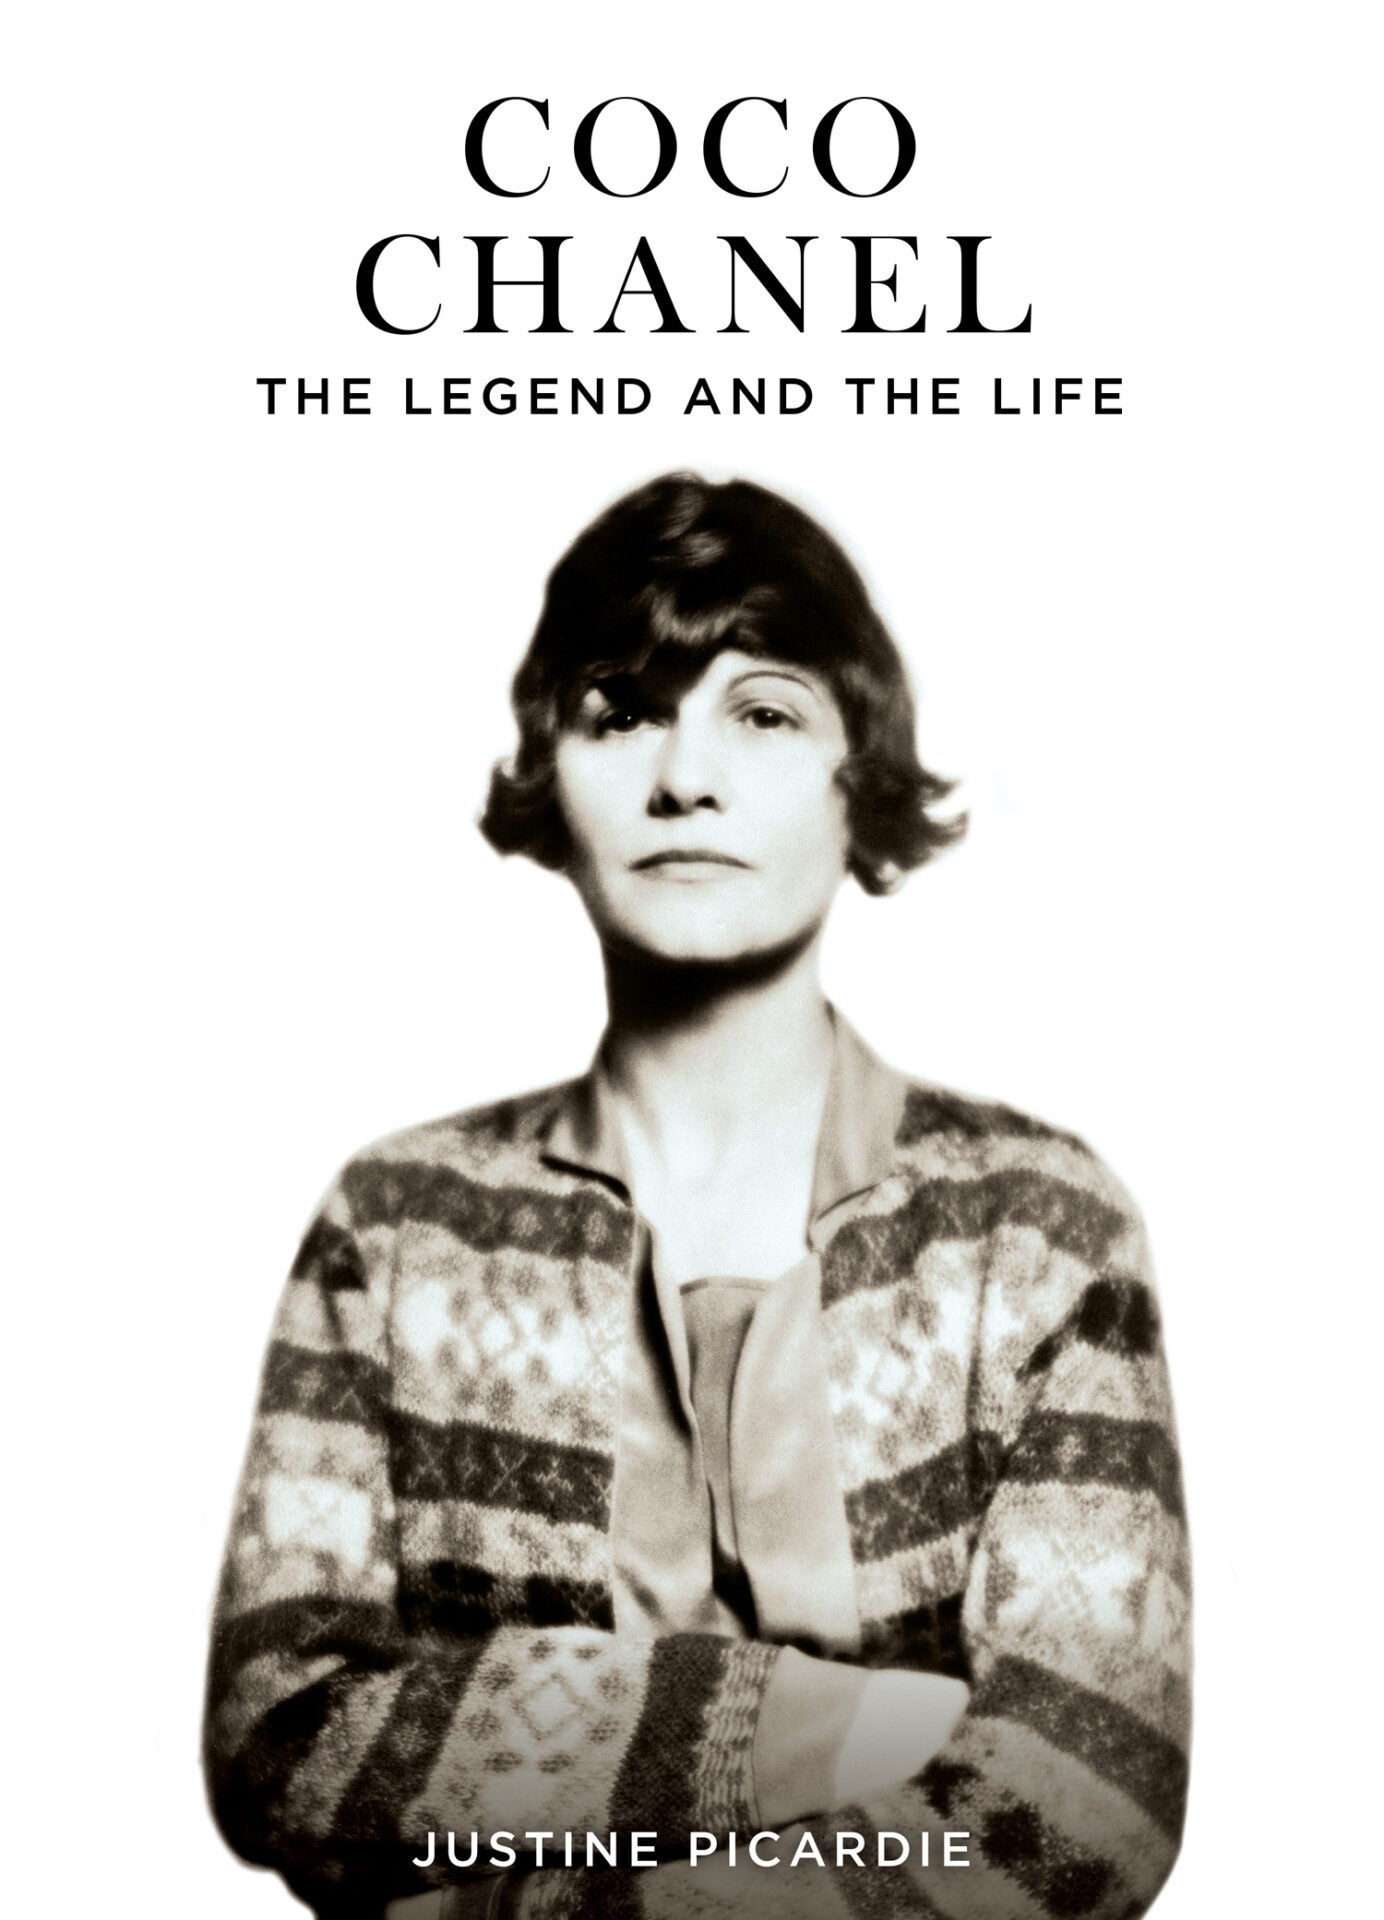 Coco Chanel: The Legend and The Life